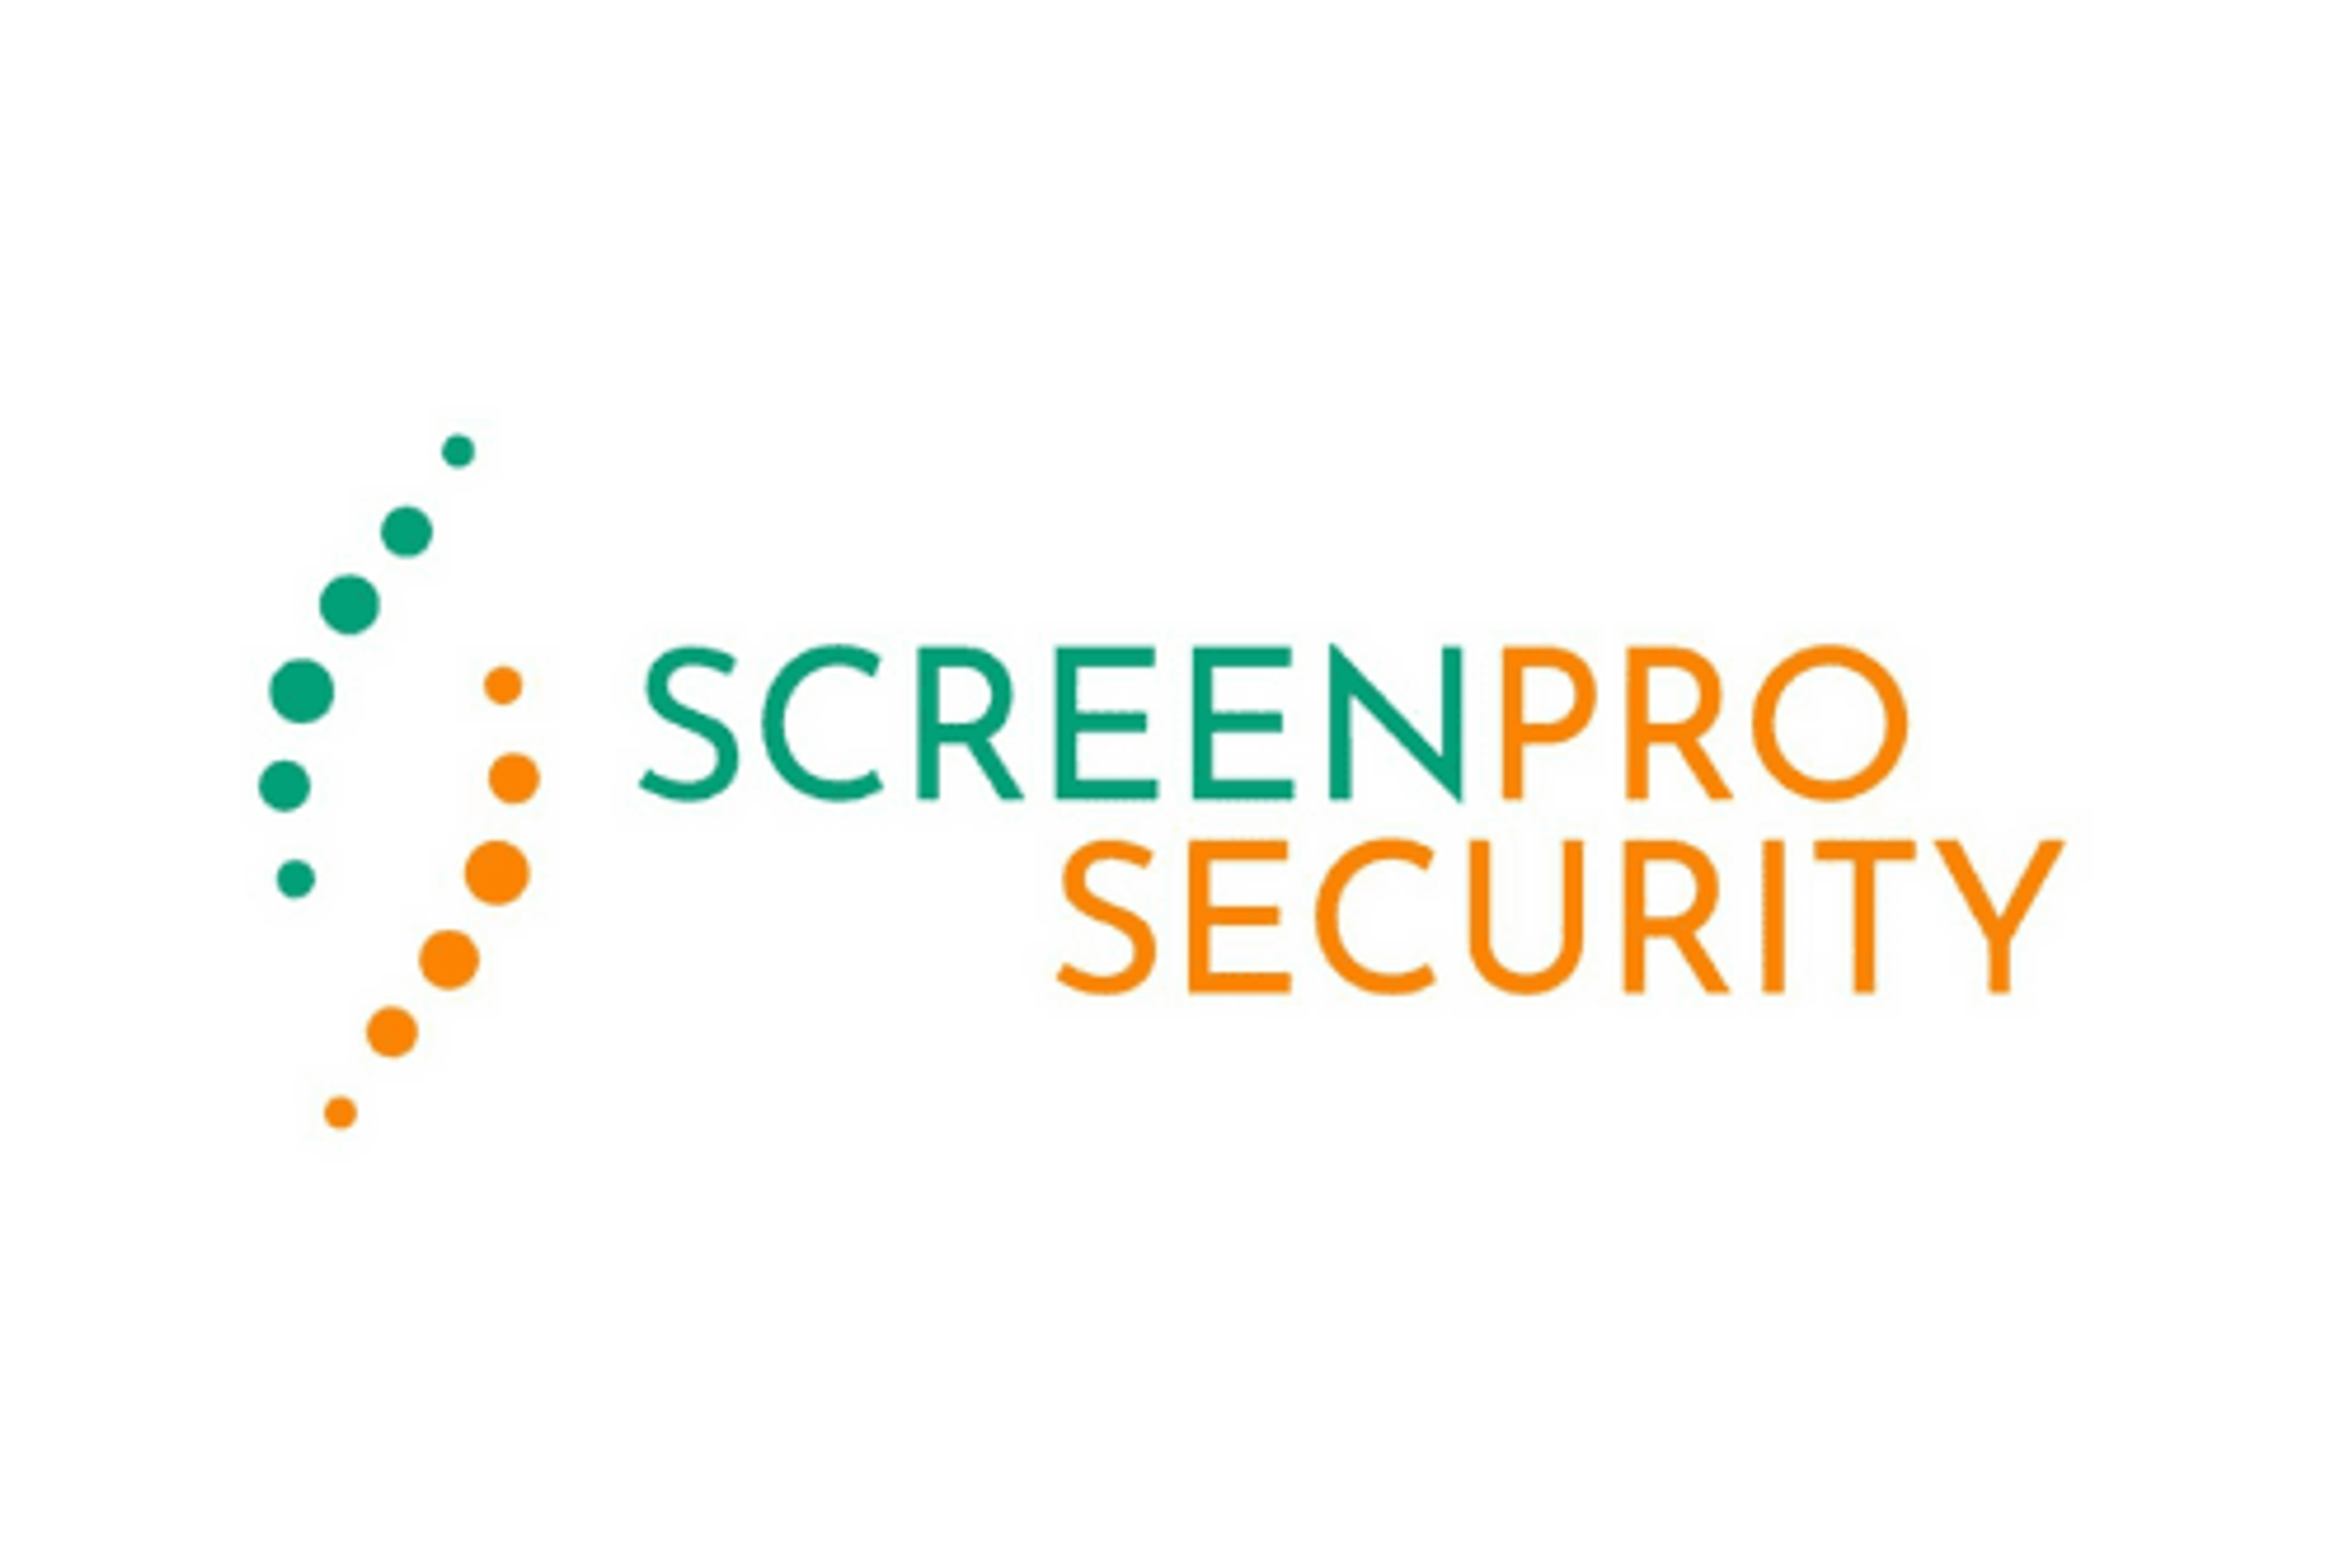 ScreenPro Security COVID Testing with Travel Certificate Available Seven Days a Week in Toronto and Vancouver